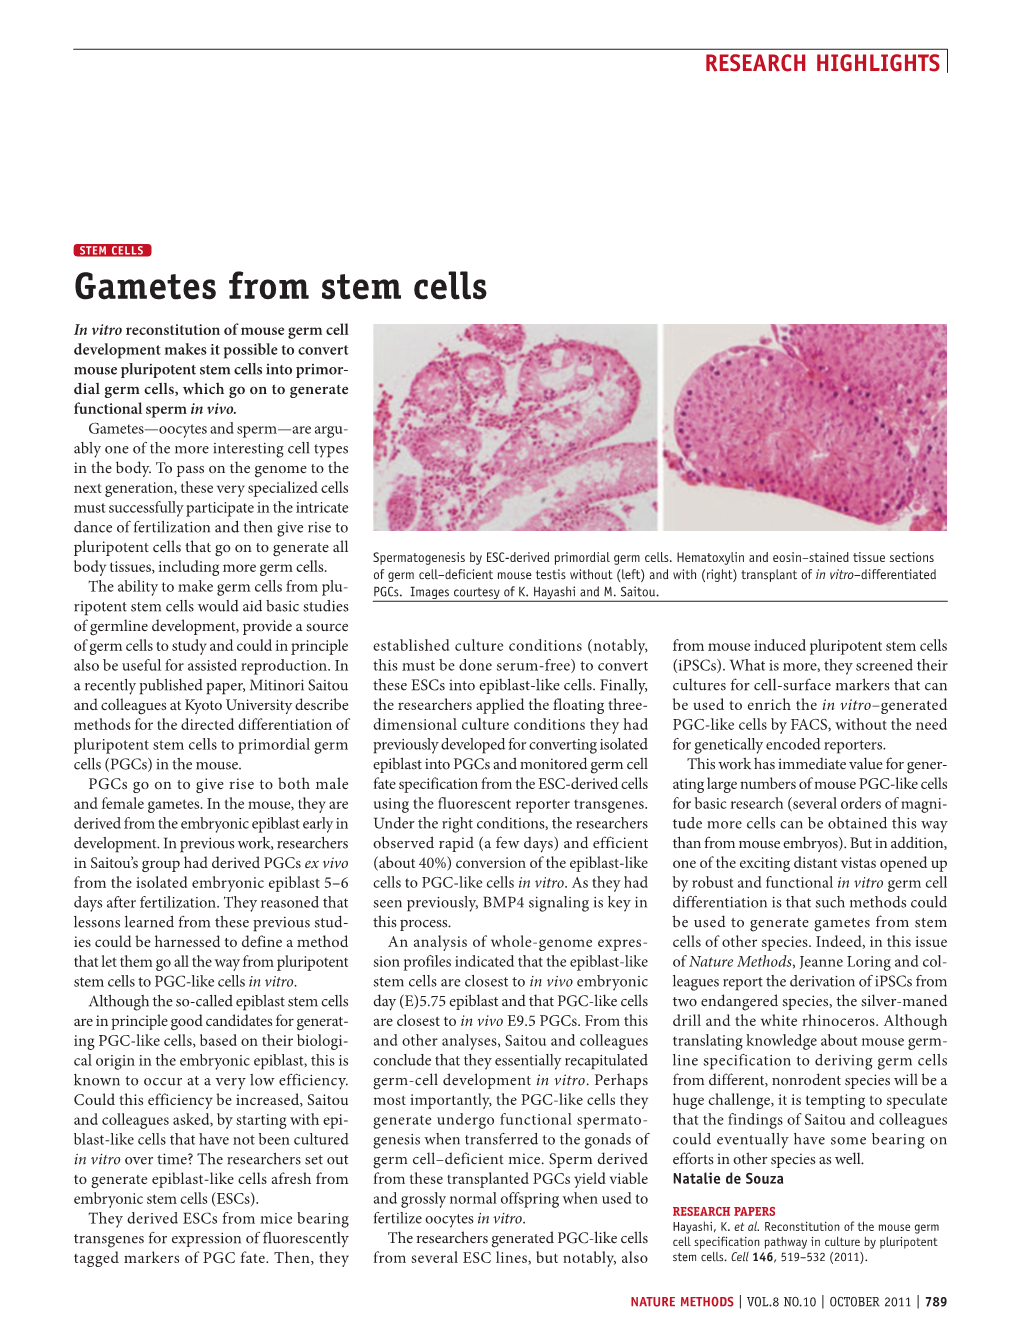 Gametes from Stem Cells